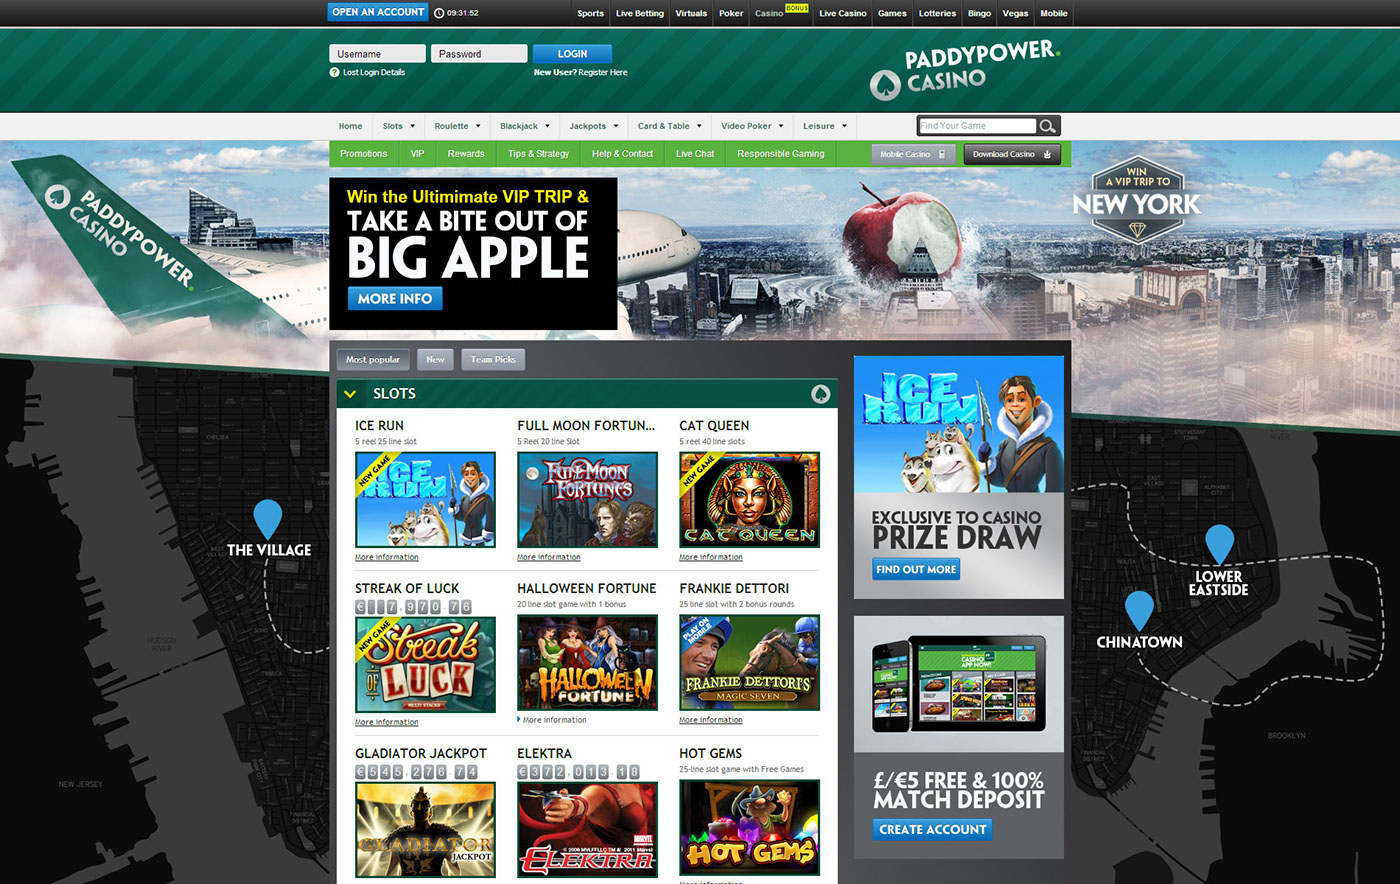 New York paddypower casino win a trip Promotion